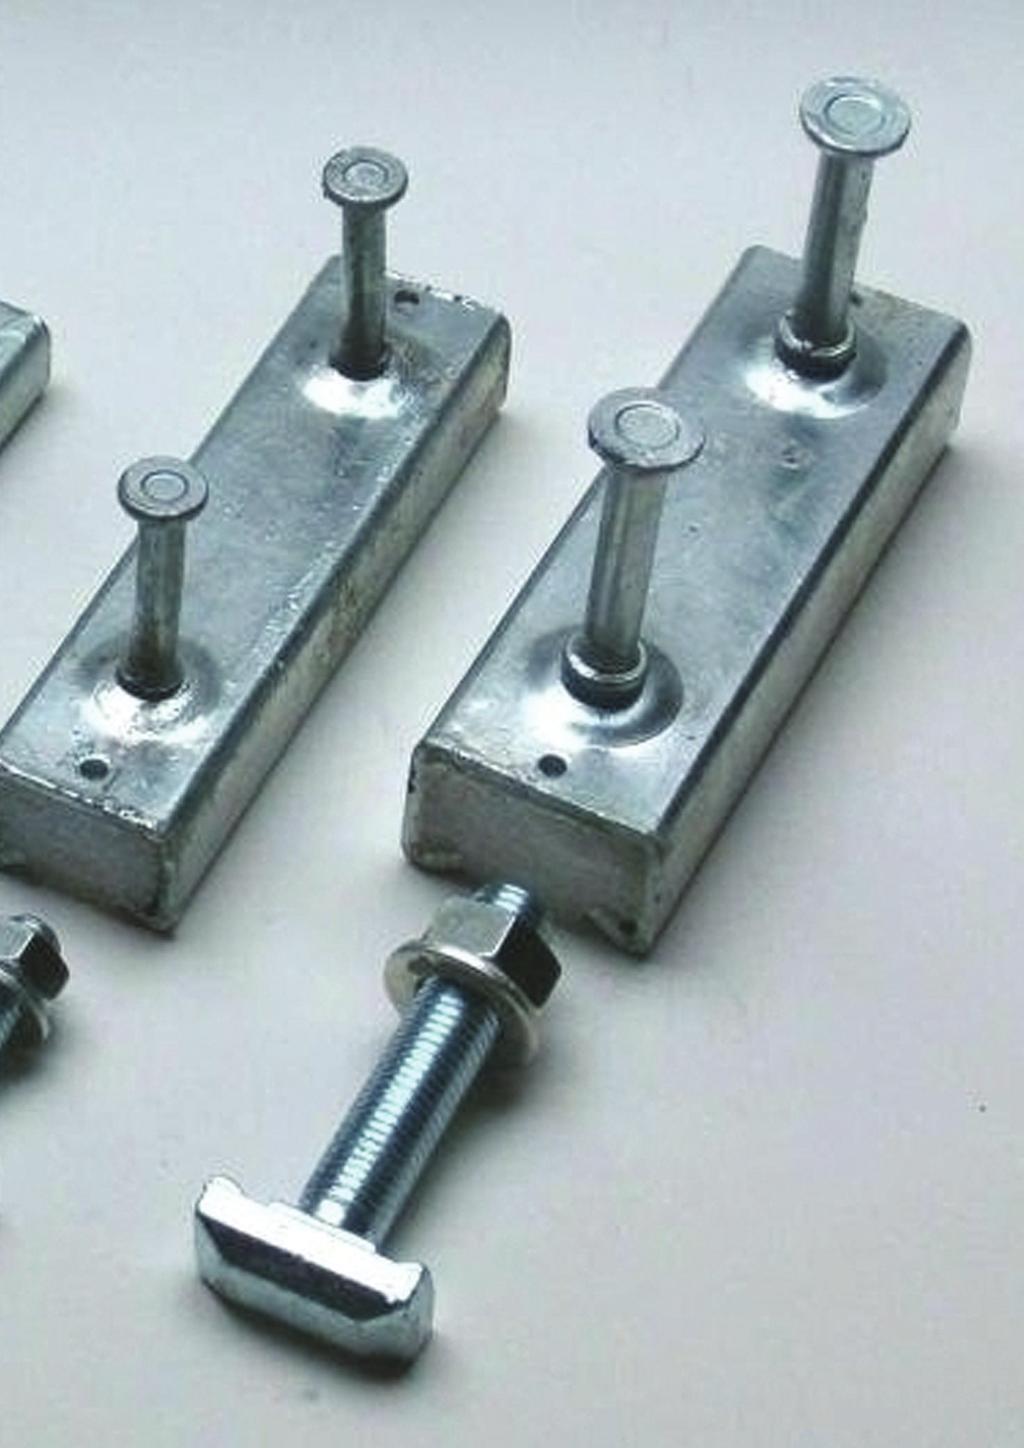 Contents MAGO Anchor Channel Anchor Channel Hot-Rolled Anchor Channel - ACH Stainless steel Cold rolled Anchor channel ACF-S Standard lengths and anchor spacing T-bolt Tightening Torque Framing